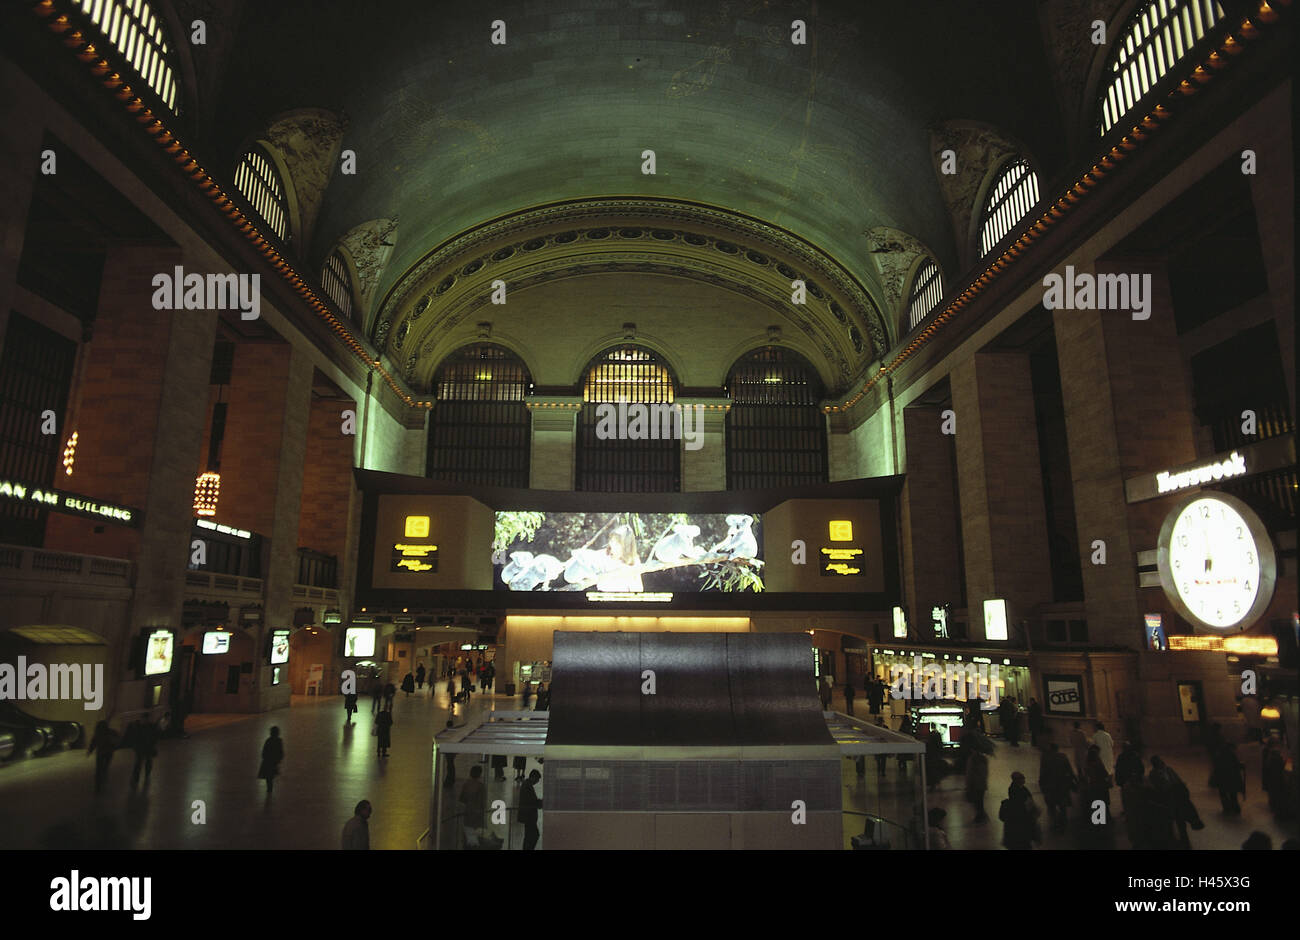 The USA, New York city, Grand Central terminal, Halle, America, station hall, railway station, Manhattan, floor railway station, architectural style, art nouveau, vault, person, travellers, inside, architecture, Stock Photo